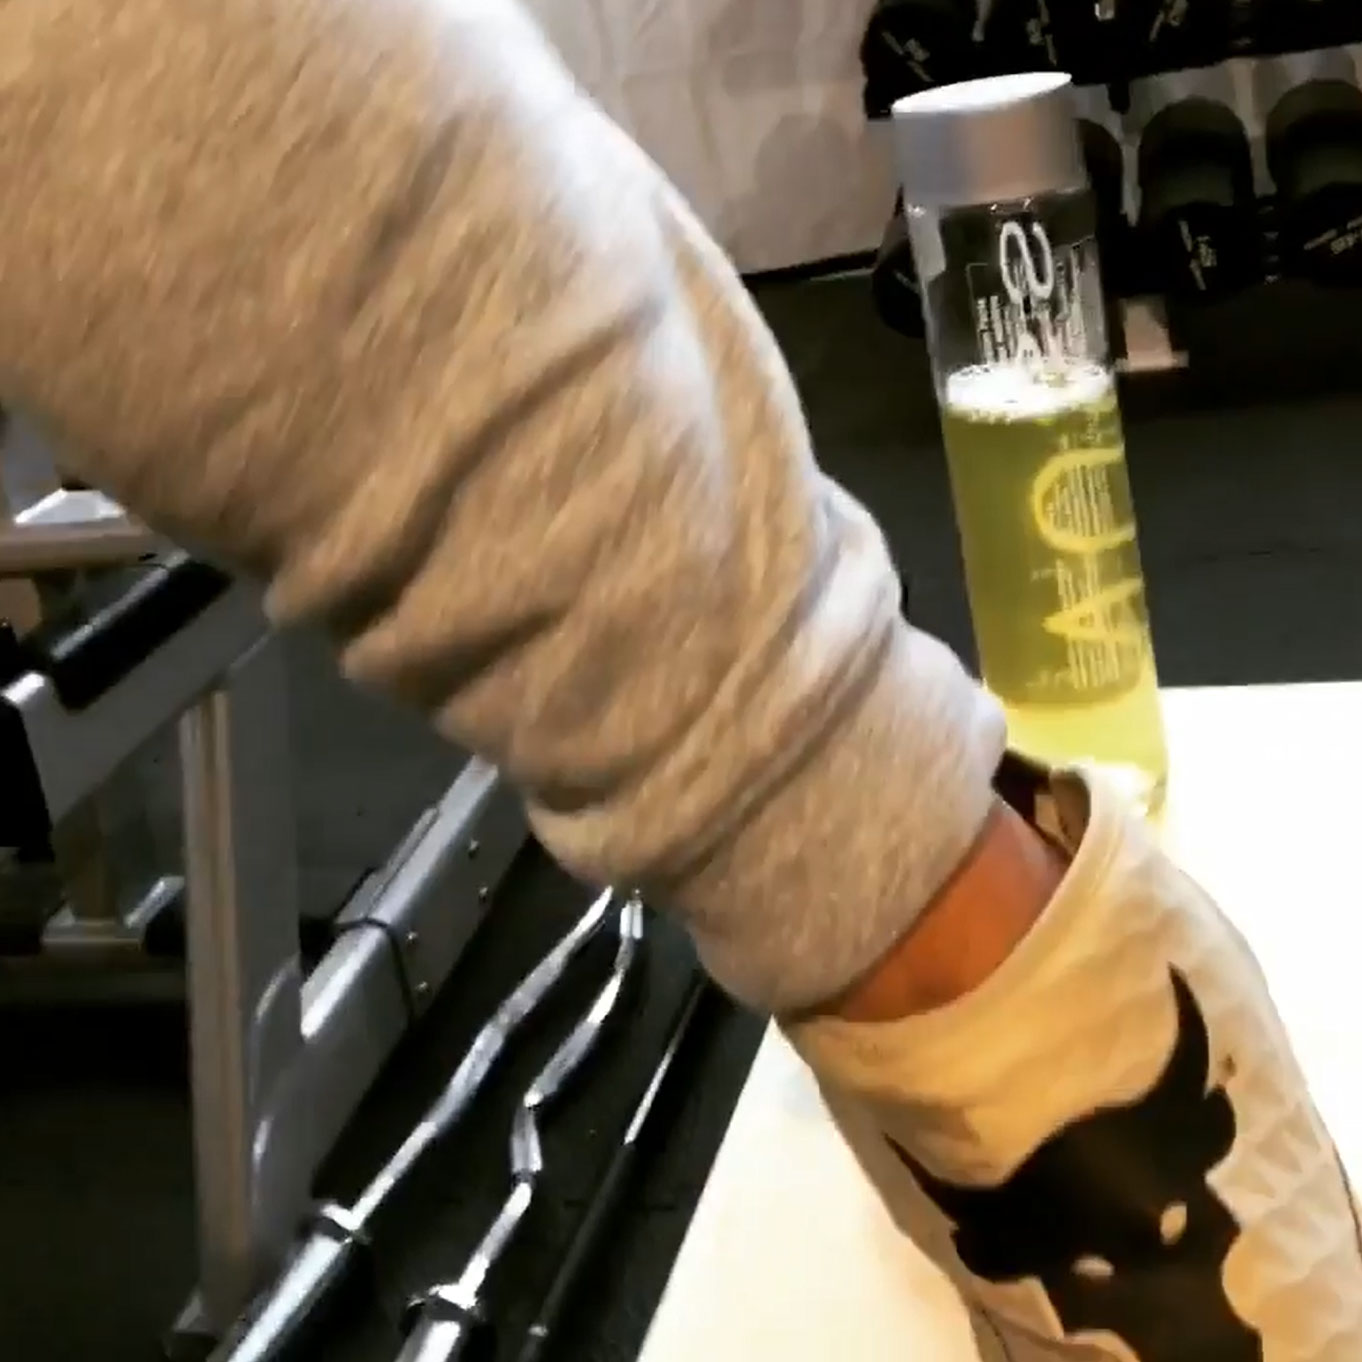 He inadvertently showed off one of the full bottles during a workout